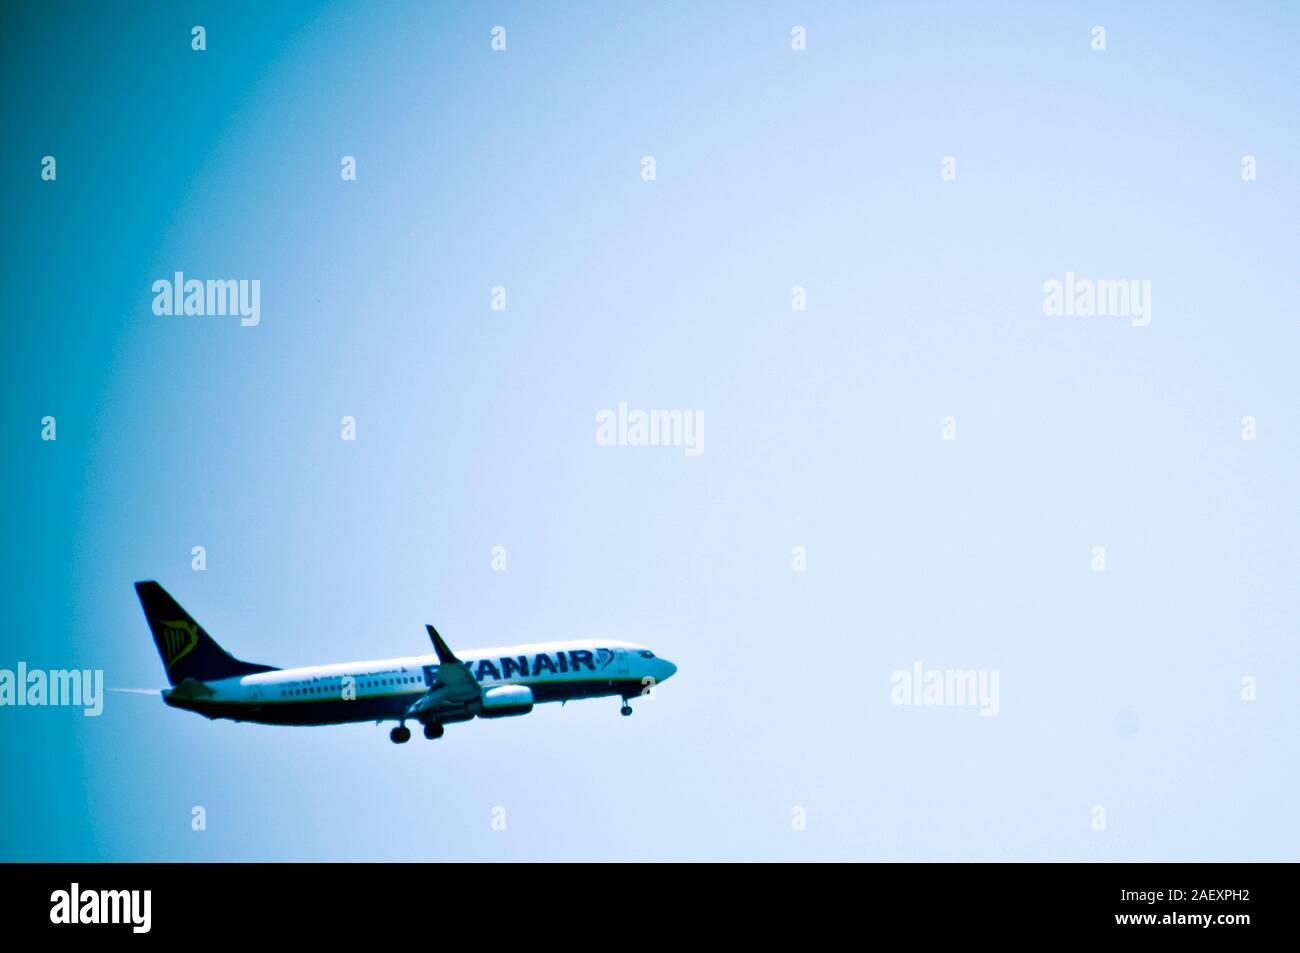 Rayanair commercial airplane Stock Photo